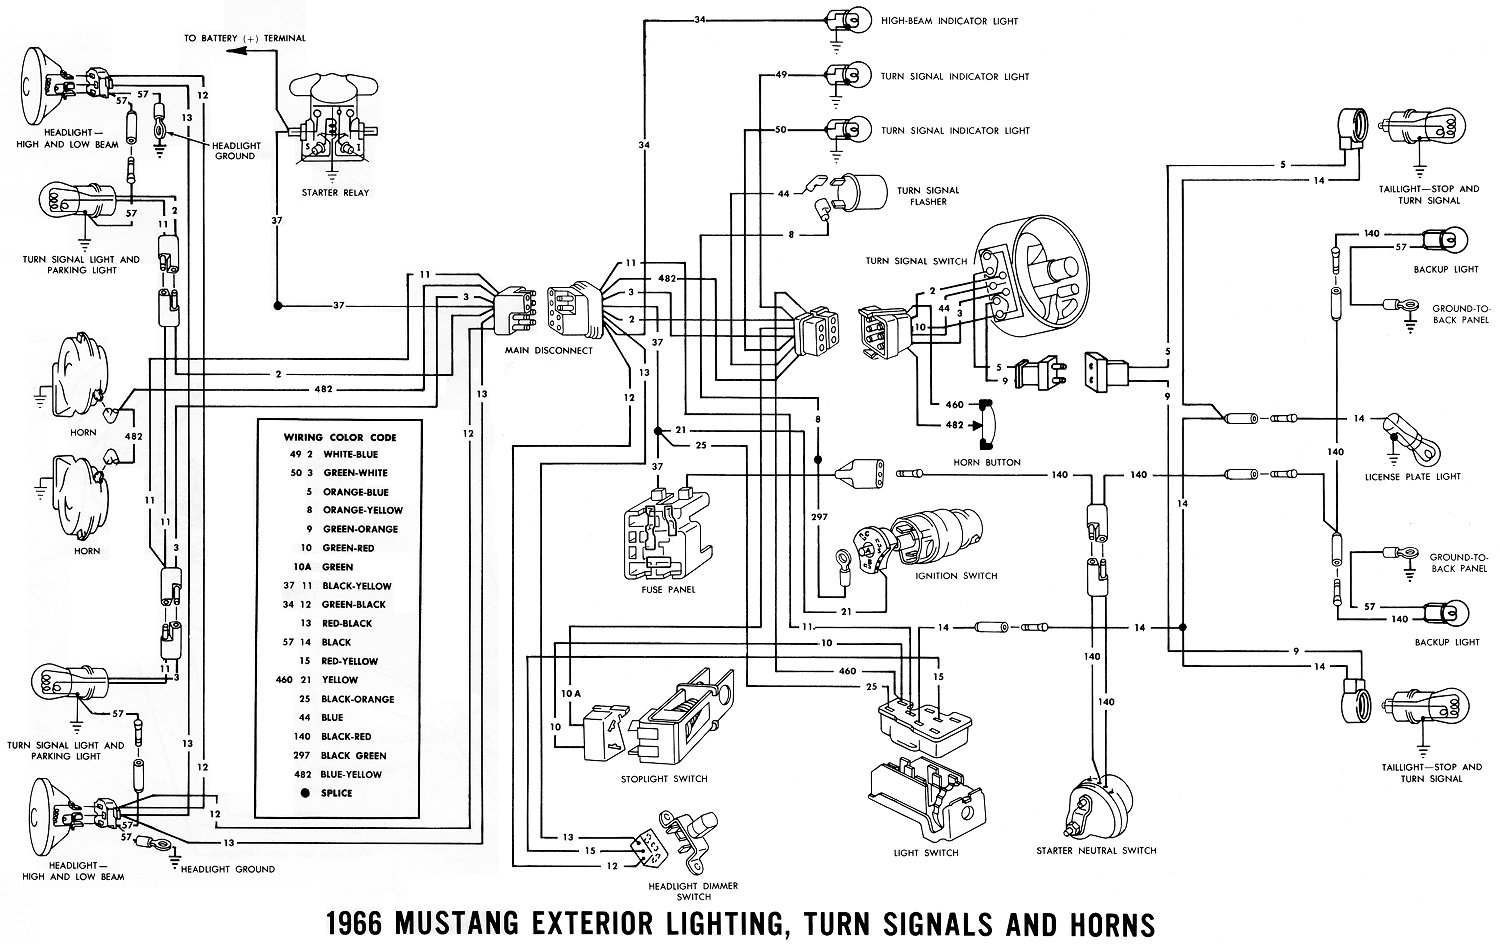 Wiring Diagram Of A 1965 Mustang Light Switch from averagejoerestoration.com